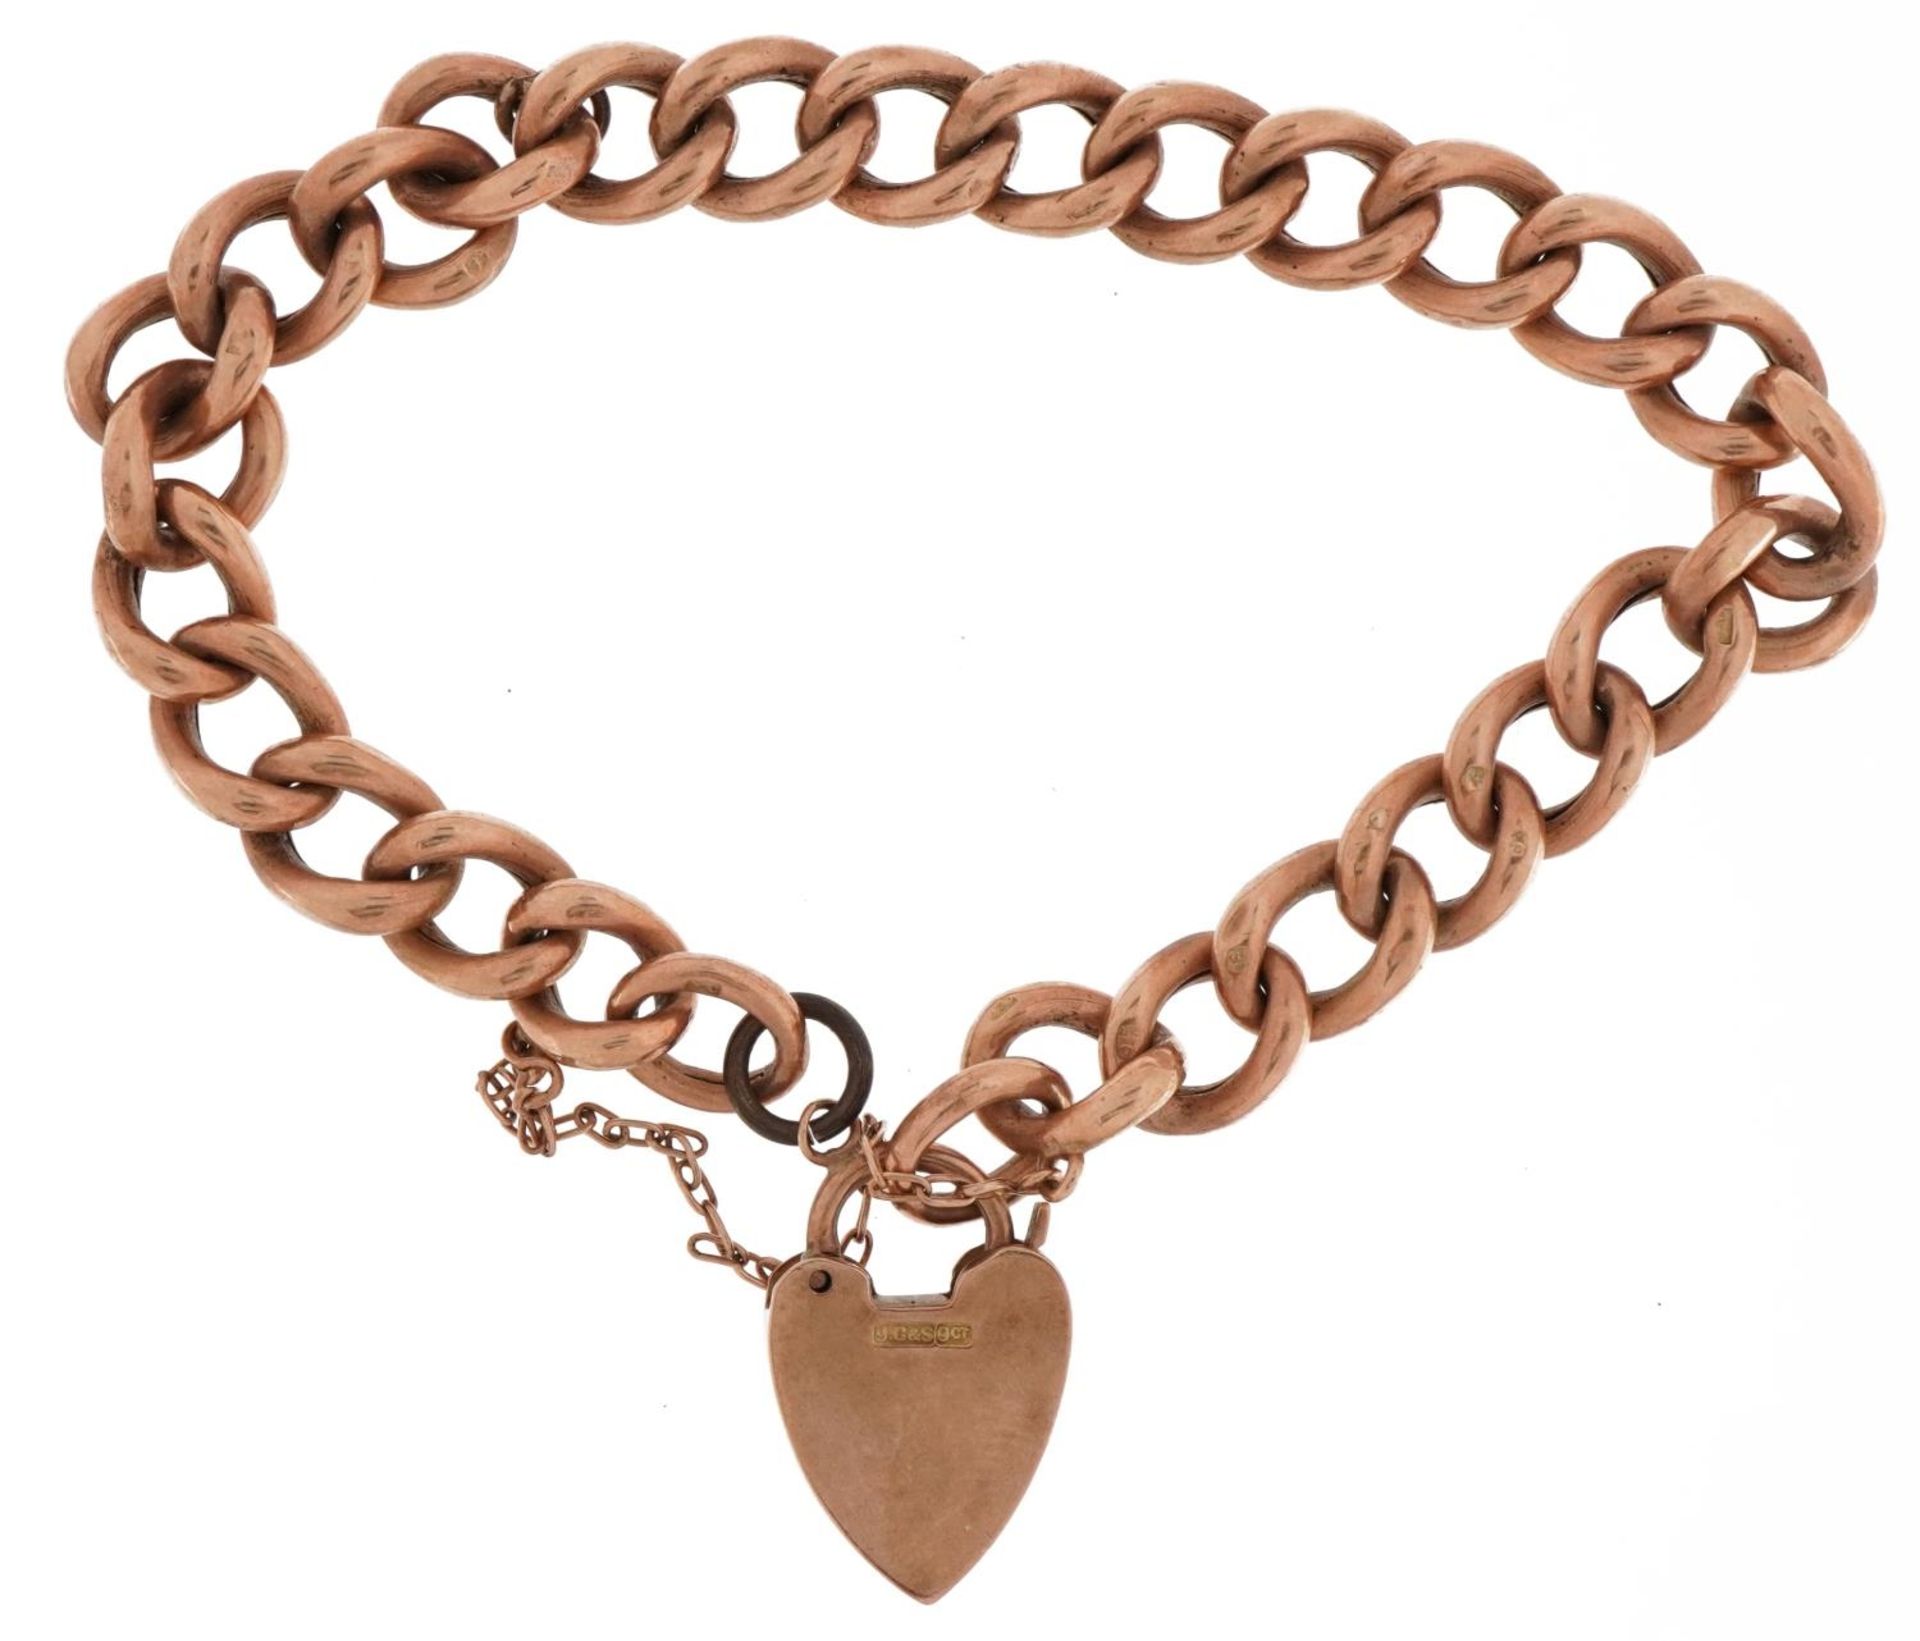 9ct rose gold bracelet with love heart padlock and safety chain, 11.8g - Bild 2 aus 3